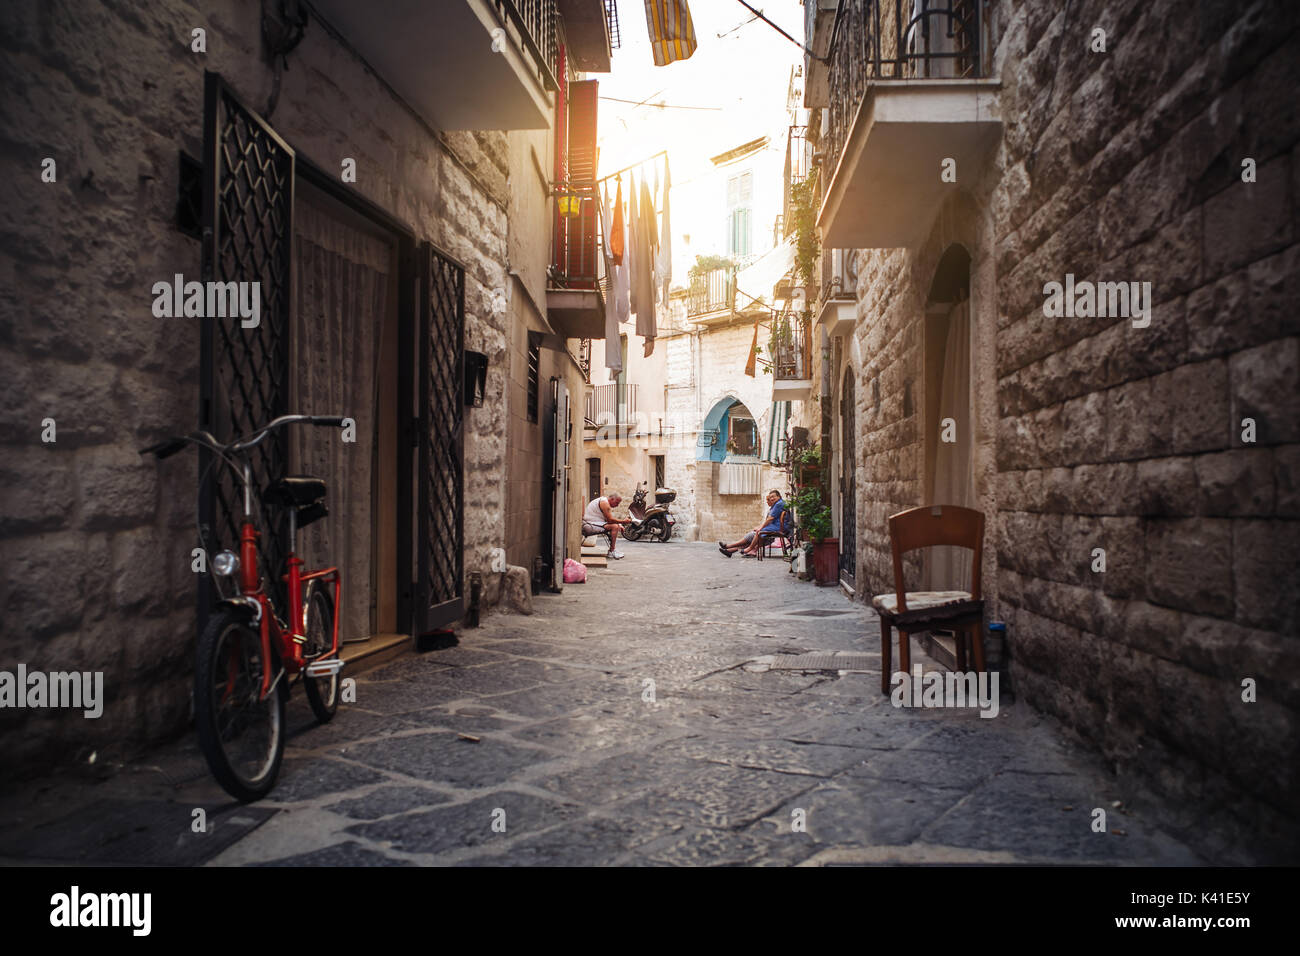 Life in the streets of the old town of Bari, Puglia region, south of Italy Stock Photo